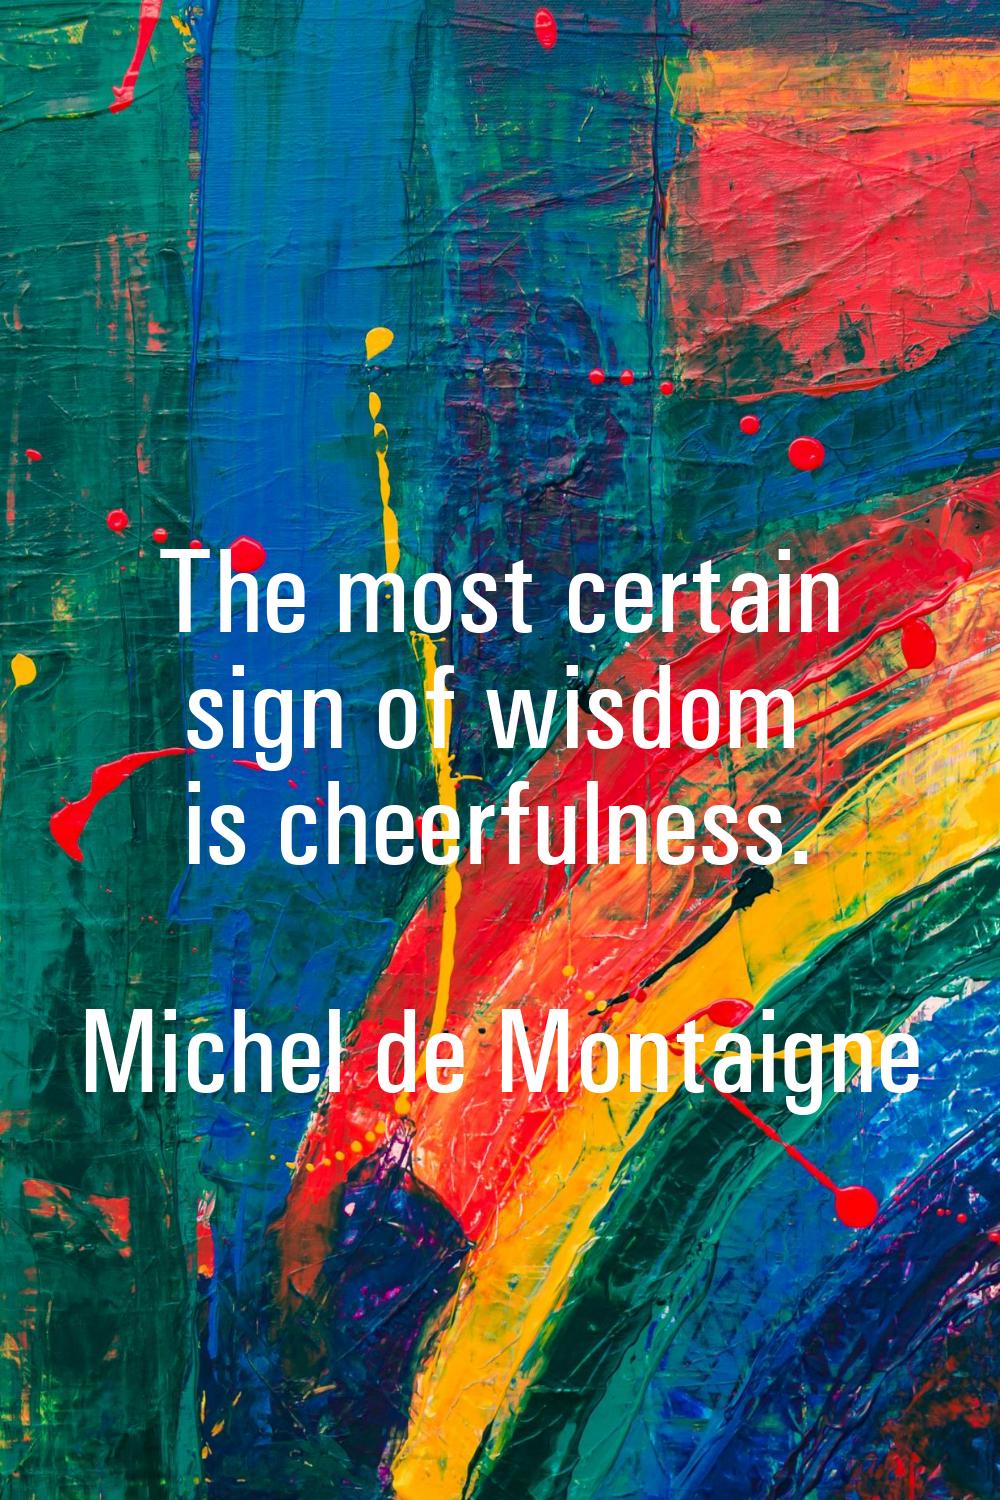 The most certain sign of wisdom is cheerfulness.